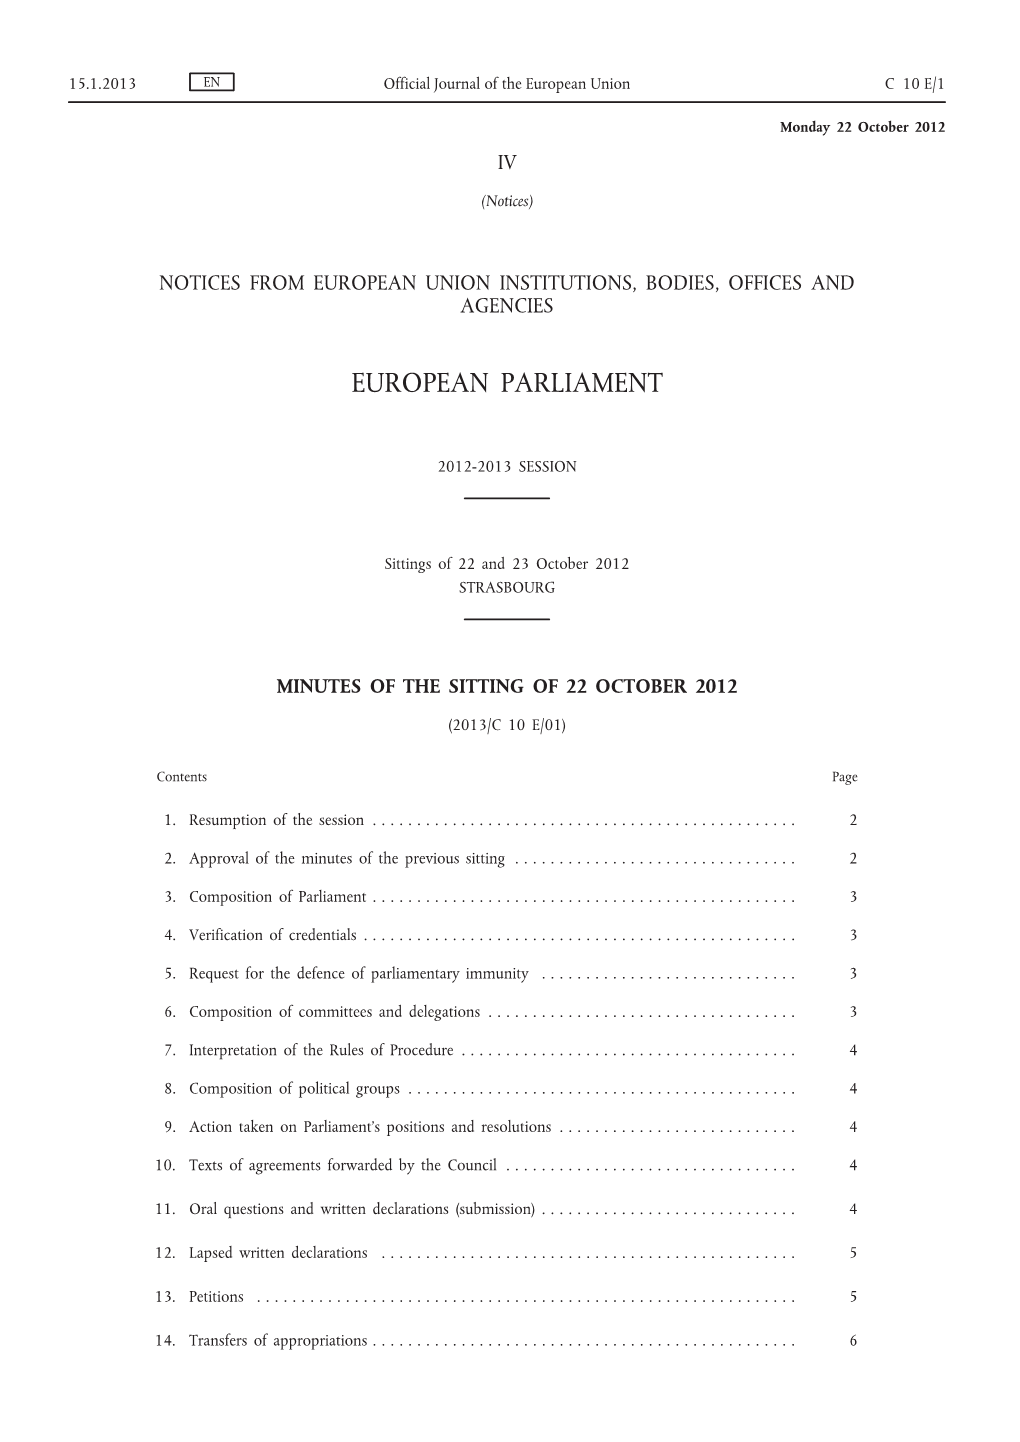 Minutes of the Sitting of 22 October 2012